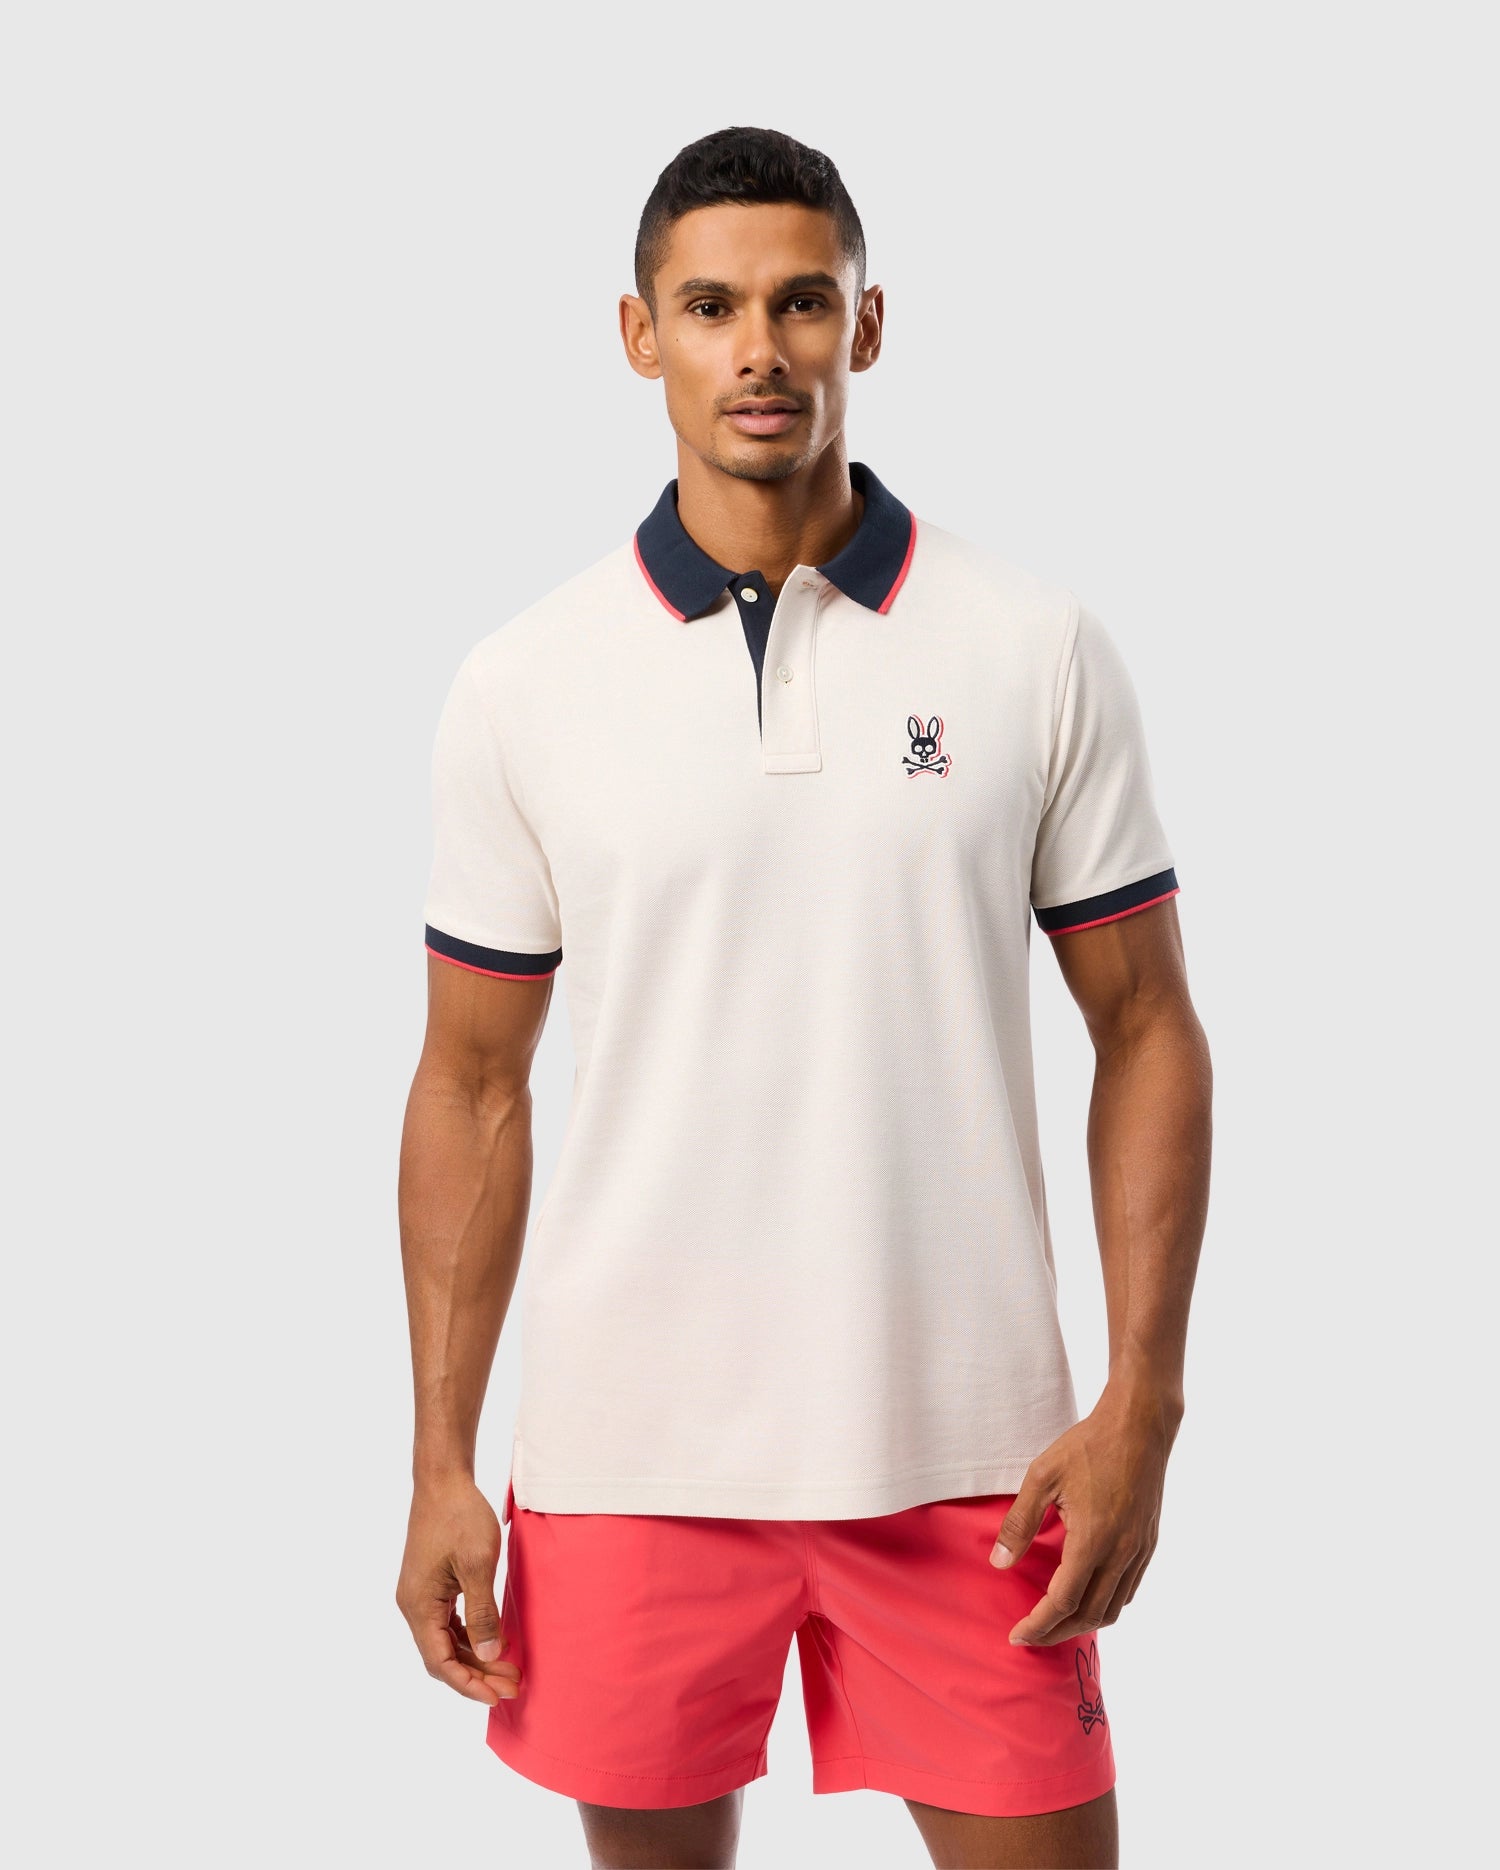 A man stands against a plain background wearing a Psycho Bunny MENS KAYDEN PIQUE POLO - B6K675C200 with a navy collar and red trim, featuring a small rabbit logo on the left chest. He is also sporting pink shorts with a small rabbit logo at the hem.